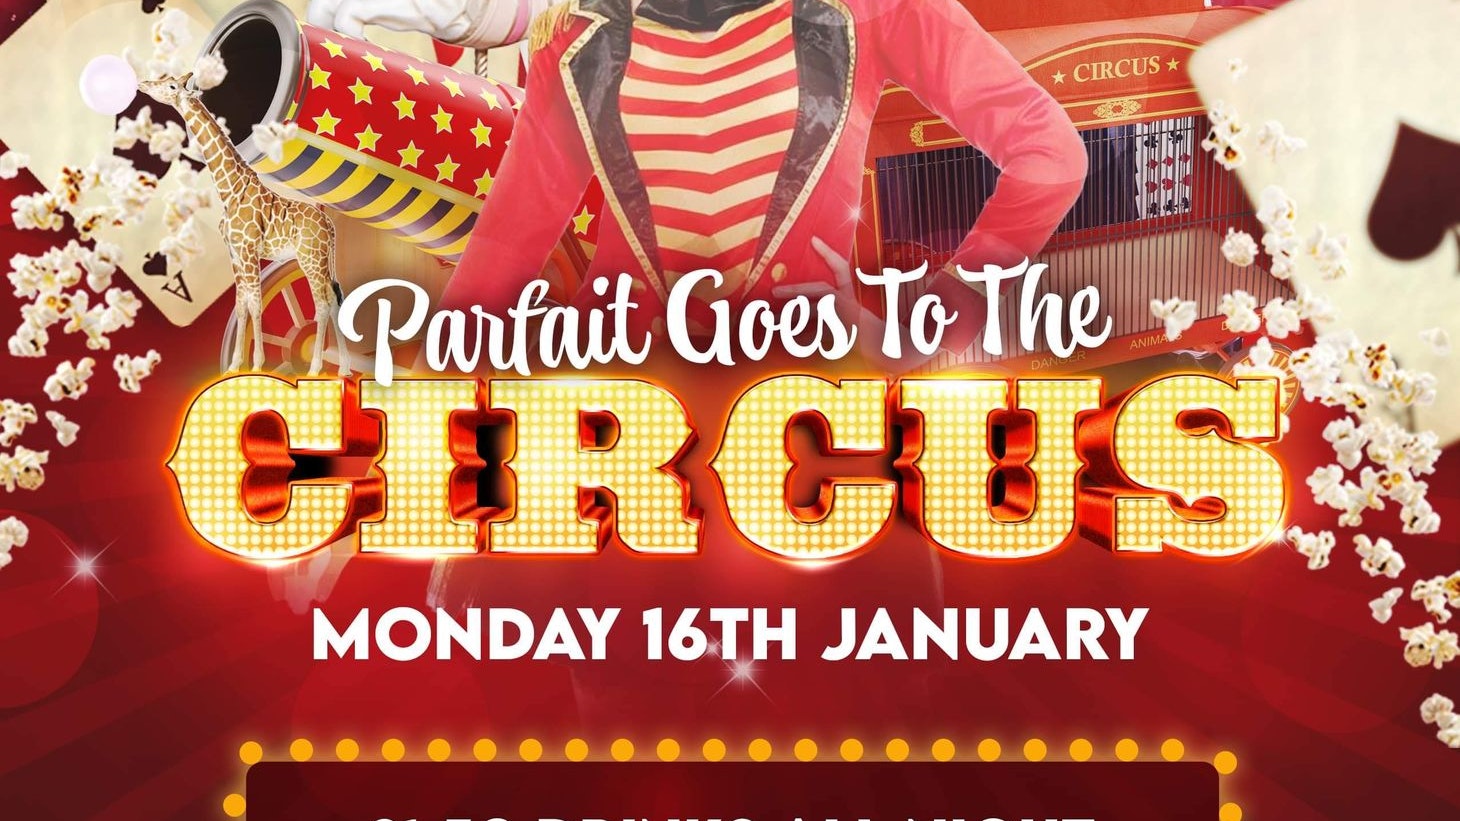 I’m A Student Get Me To Parfait// Parfait Goes to the Circus!